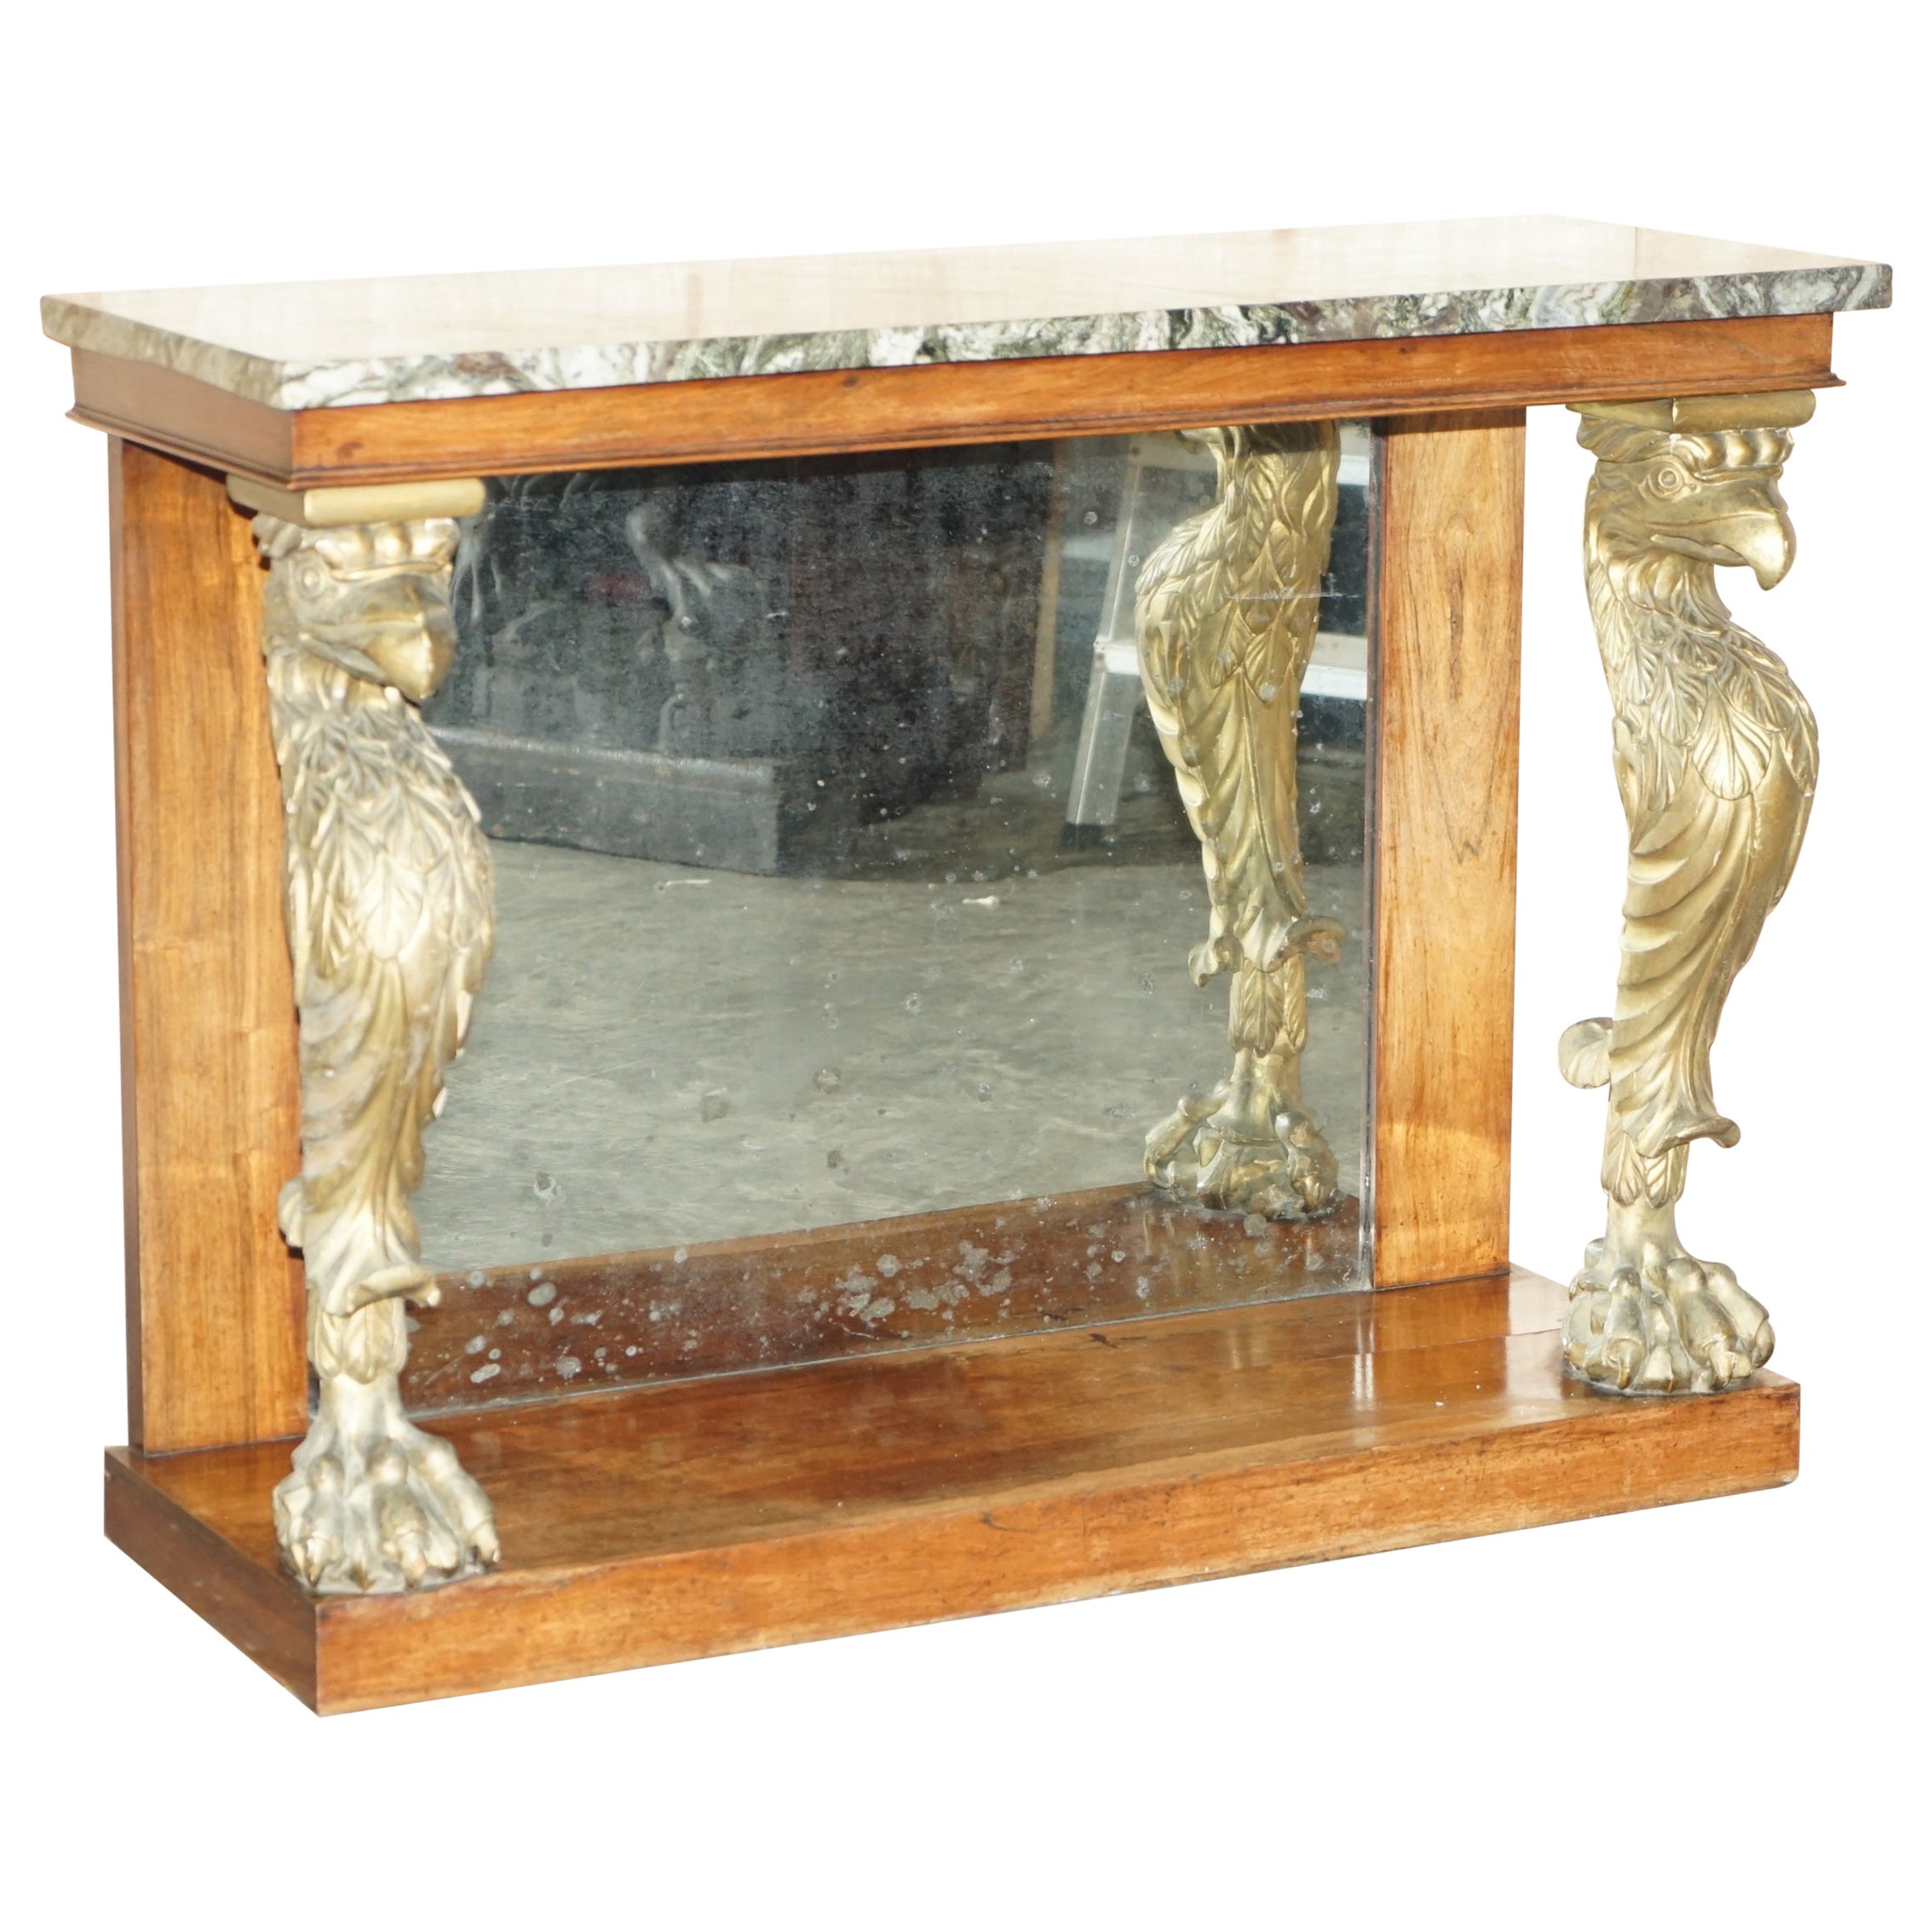 Stunning Antique Regency Hardwood Giltwood & Marble Eagle Carved Console Table For Sale